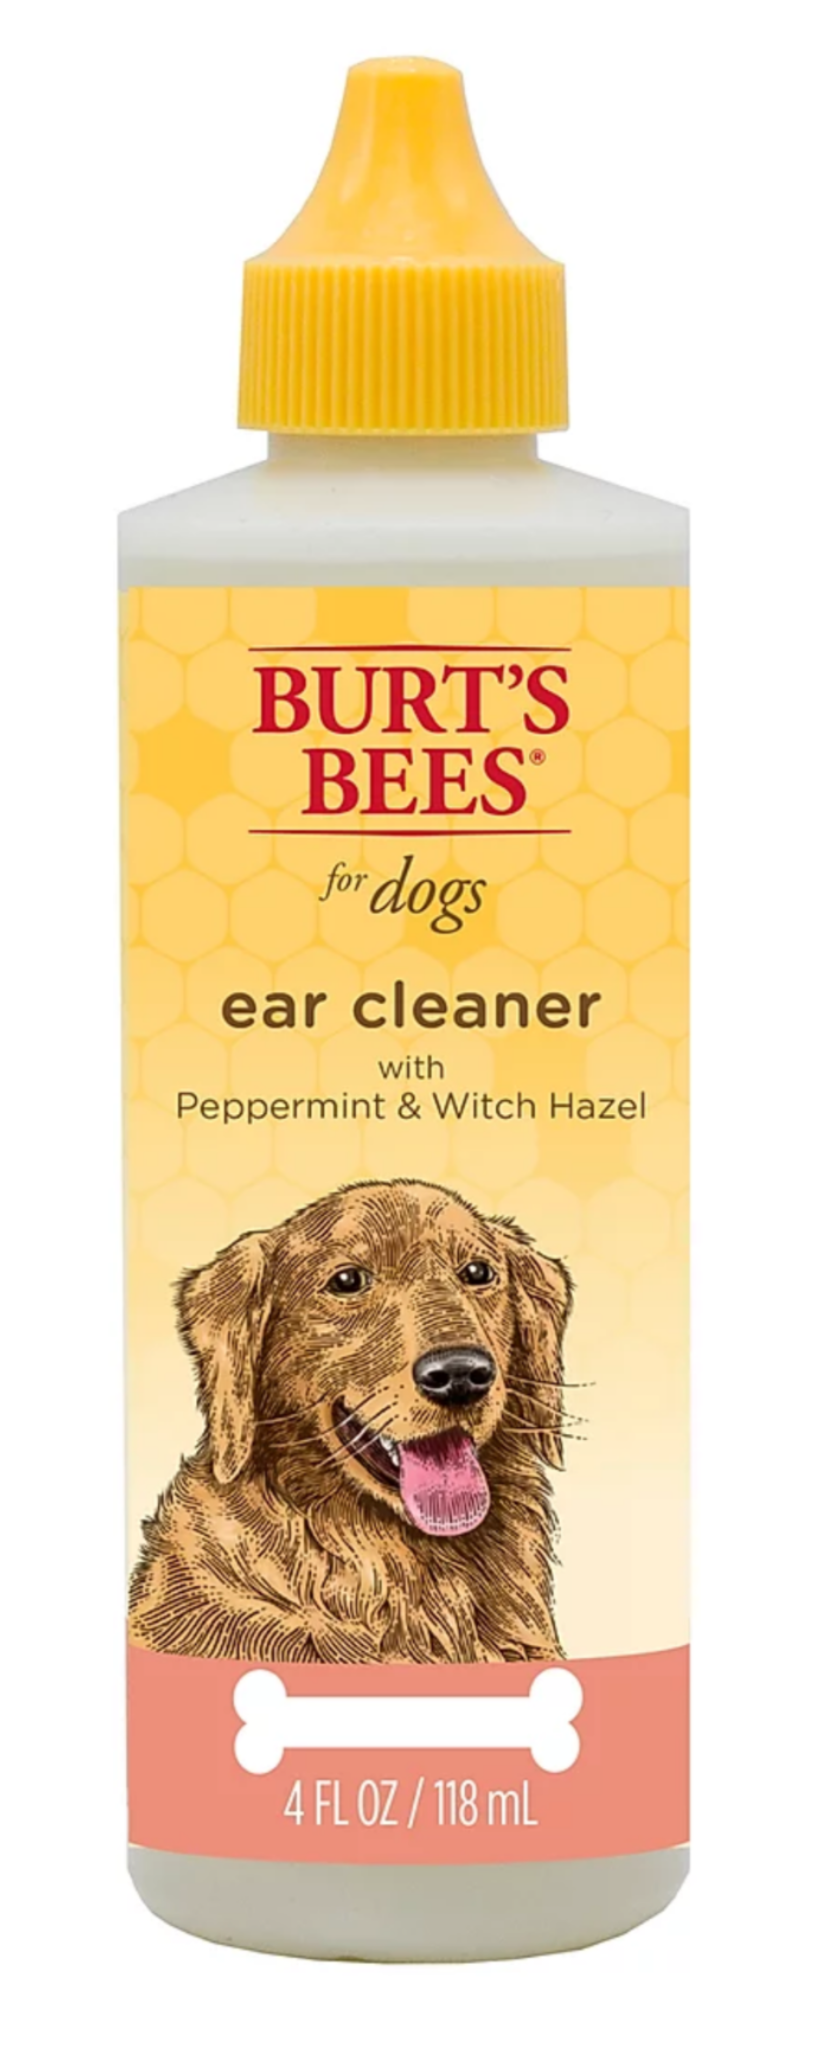 Burt's Bees Ear Cleaner
With Peppermint & Witch Hazel